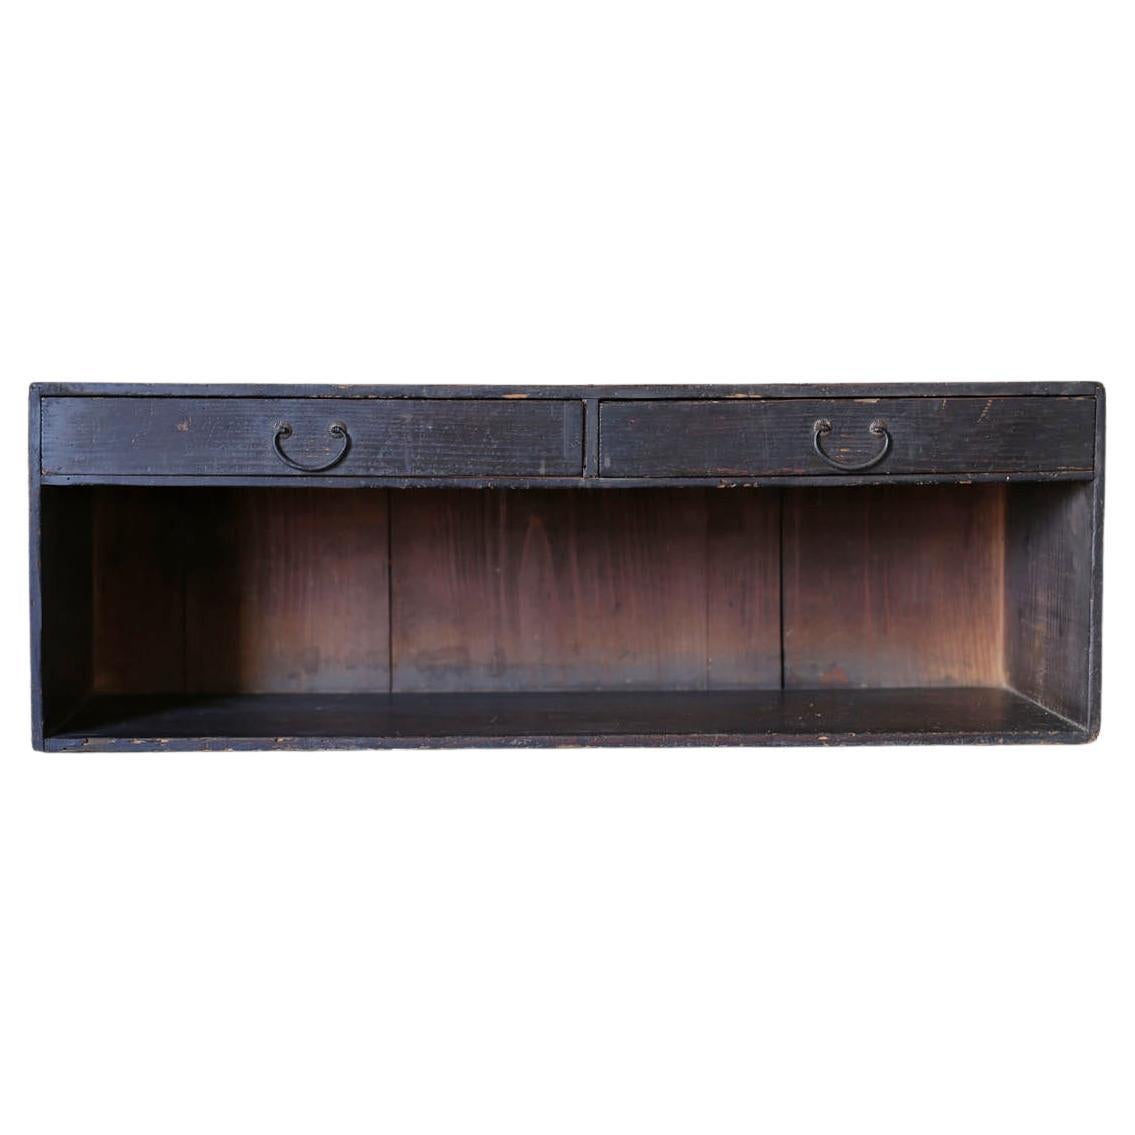 Japanese Antique Black Wooden Drawer / Small Low Desk / 1868-1920 / Chest For Sale